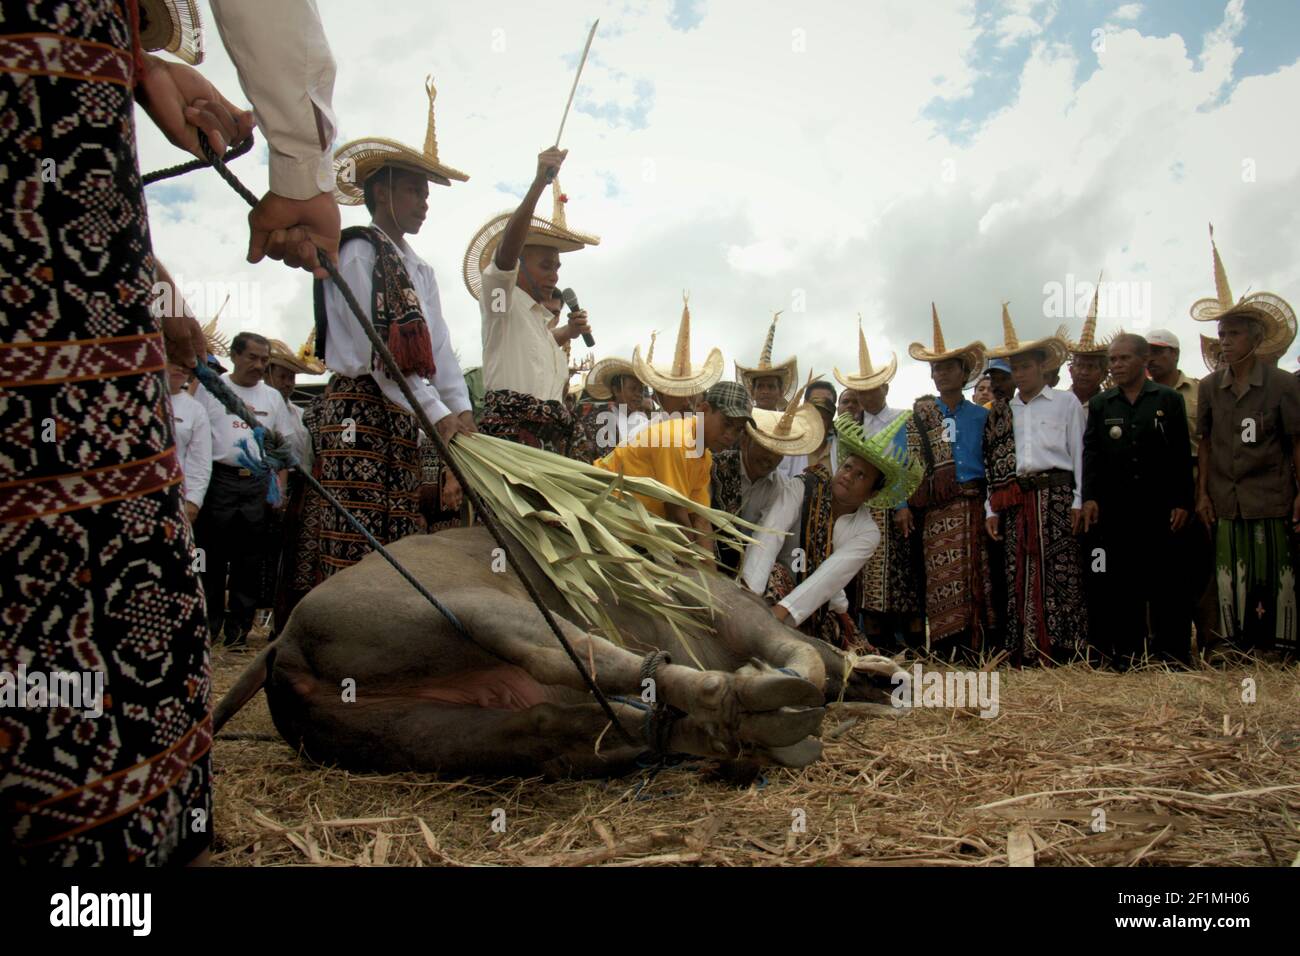 Rote Island, Indonesia. July 16, 2009. Elders of different clans slaughtering a water buffalo, a ritual to declare that they have reached a consensus to save the Rote Island's snake-necked turtle (Chelodina mccordi) from extinction, during a ceremonial event to release the turtles bred in captivity back to a suitable habitat. Lake Peto, Maubesi village, Rote Ndao regency, East Nusa Tenggara, Indonesia. Stock Photo